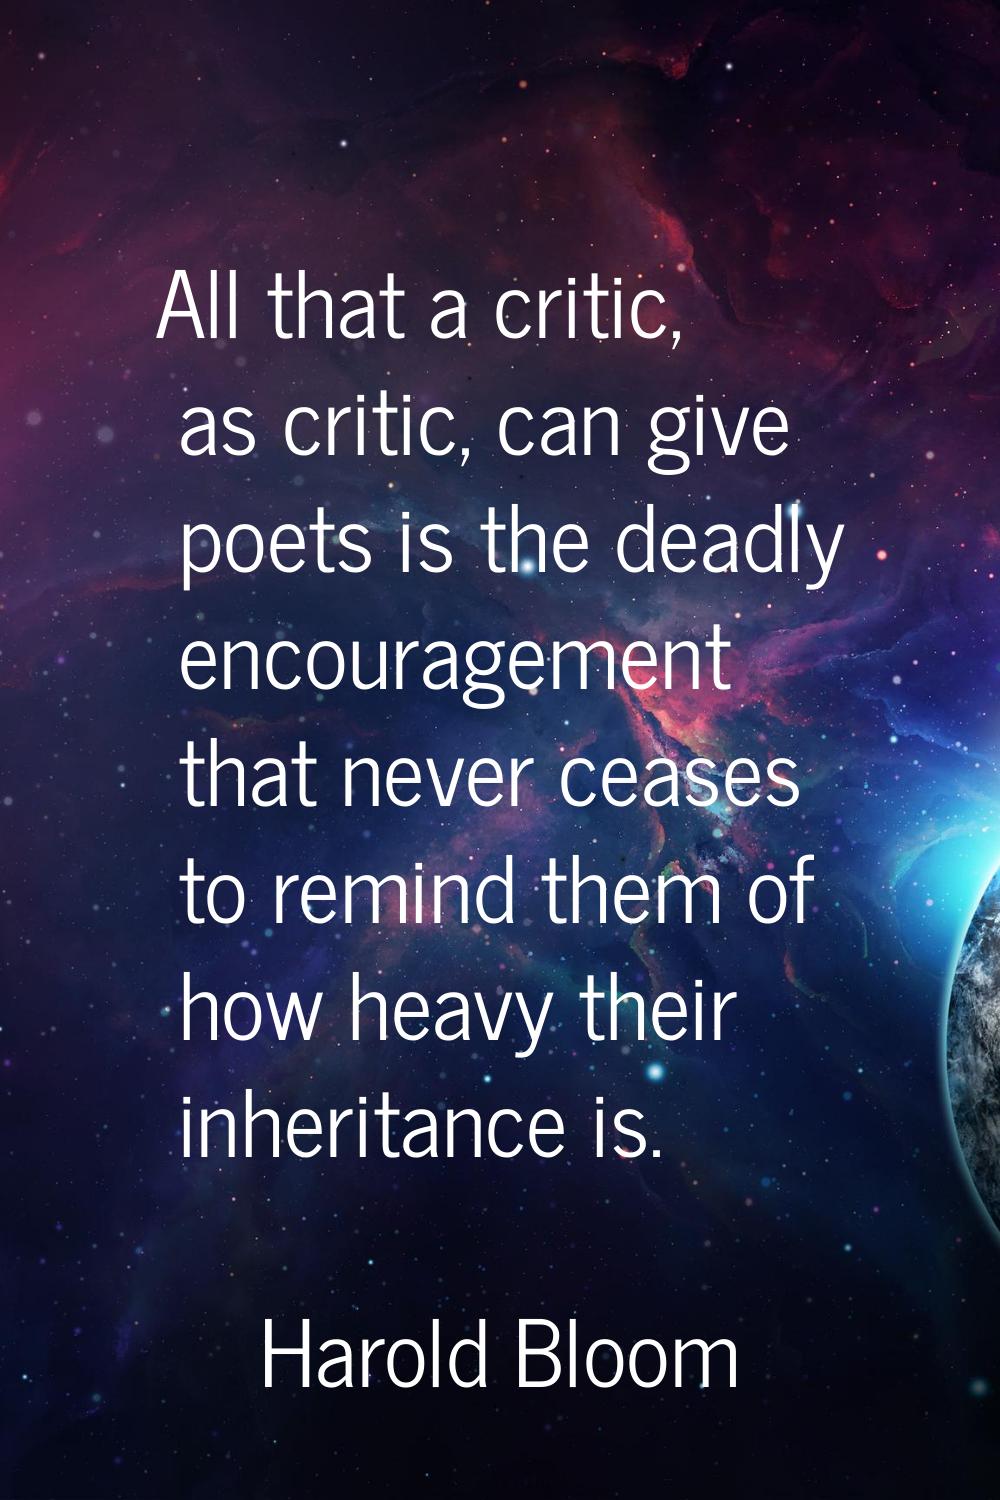 All that a critic, as critic, can give poets is the deadly encouragement that never ceases to remin